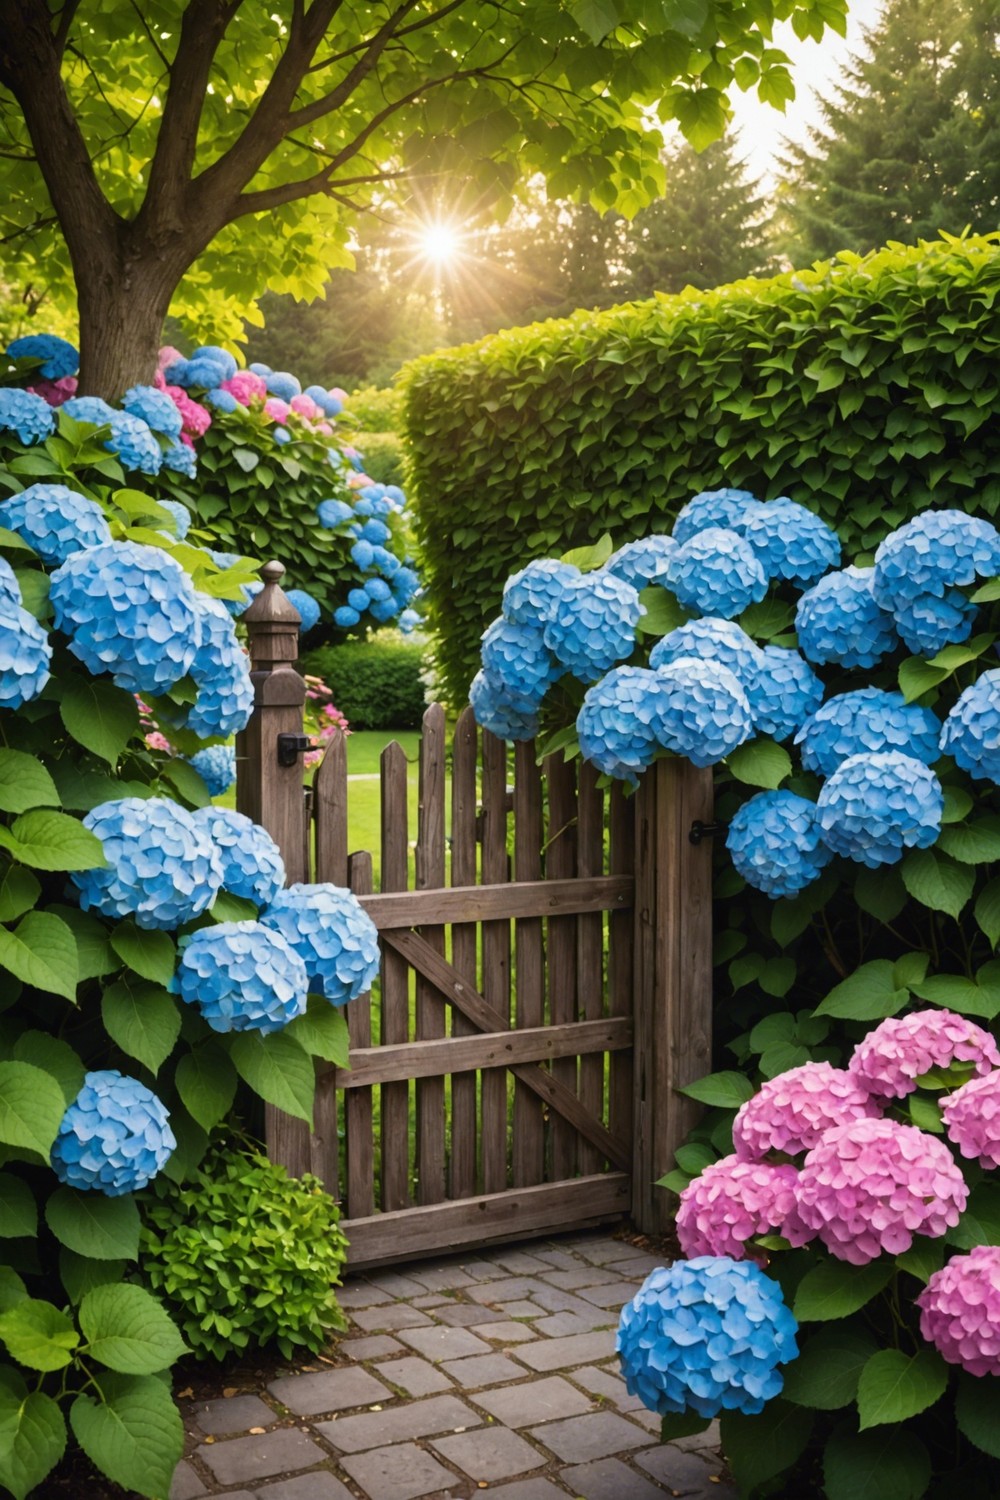 Hydrangea Hedge with a Gate